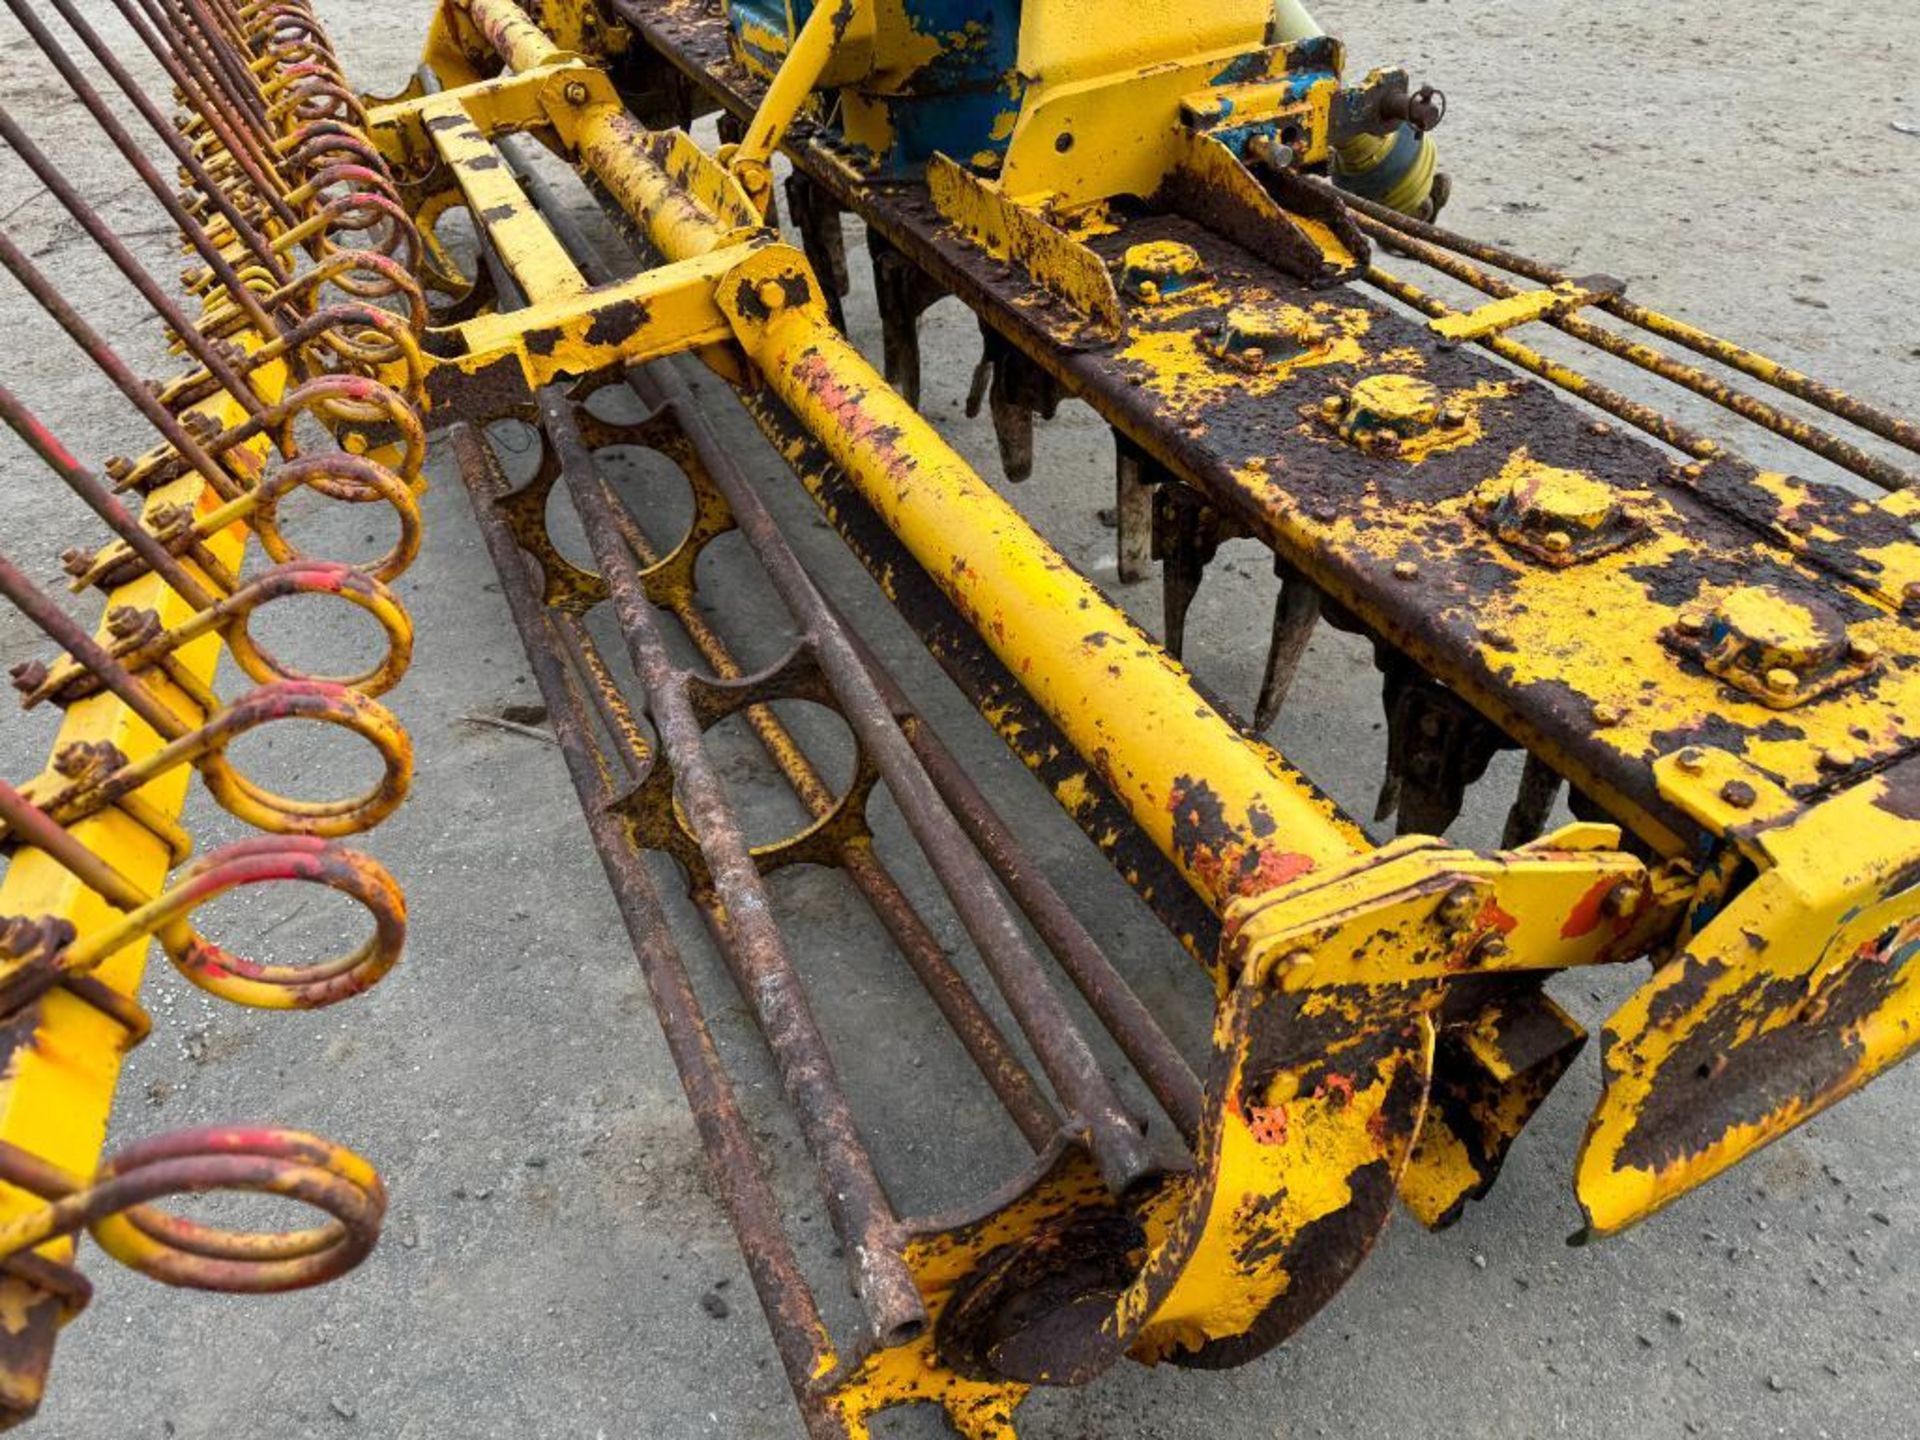 Falc 3m power harrow with rear crumbler roller, linkage mounted - Image 7 of 9